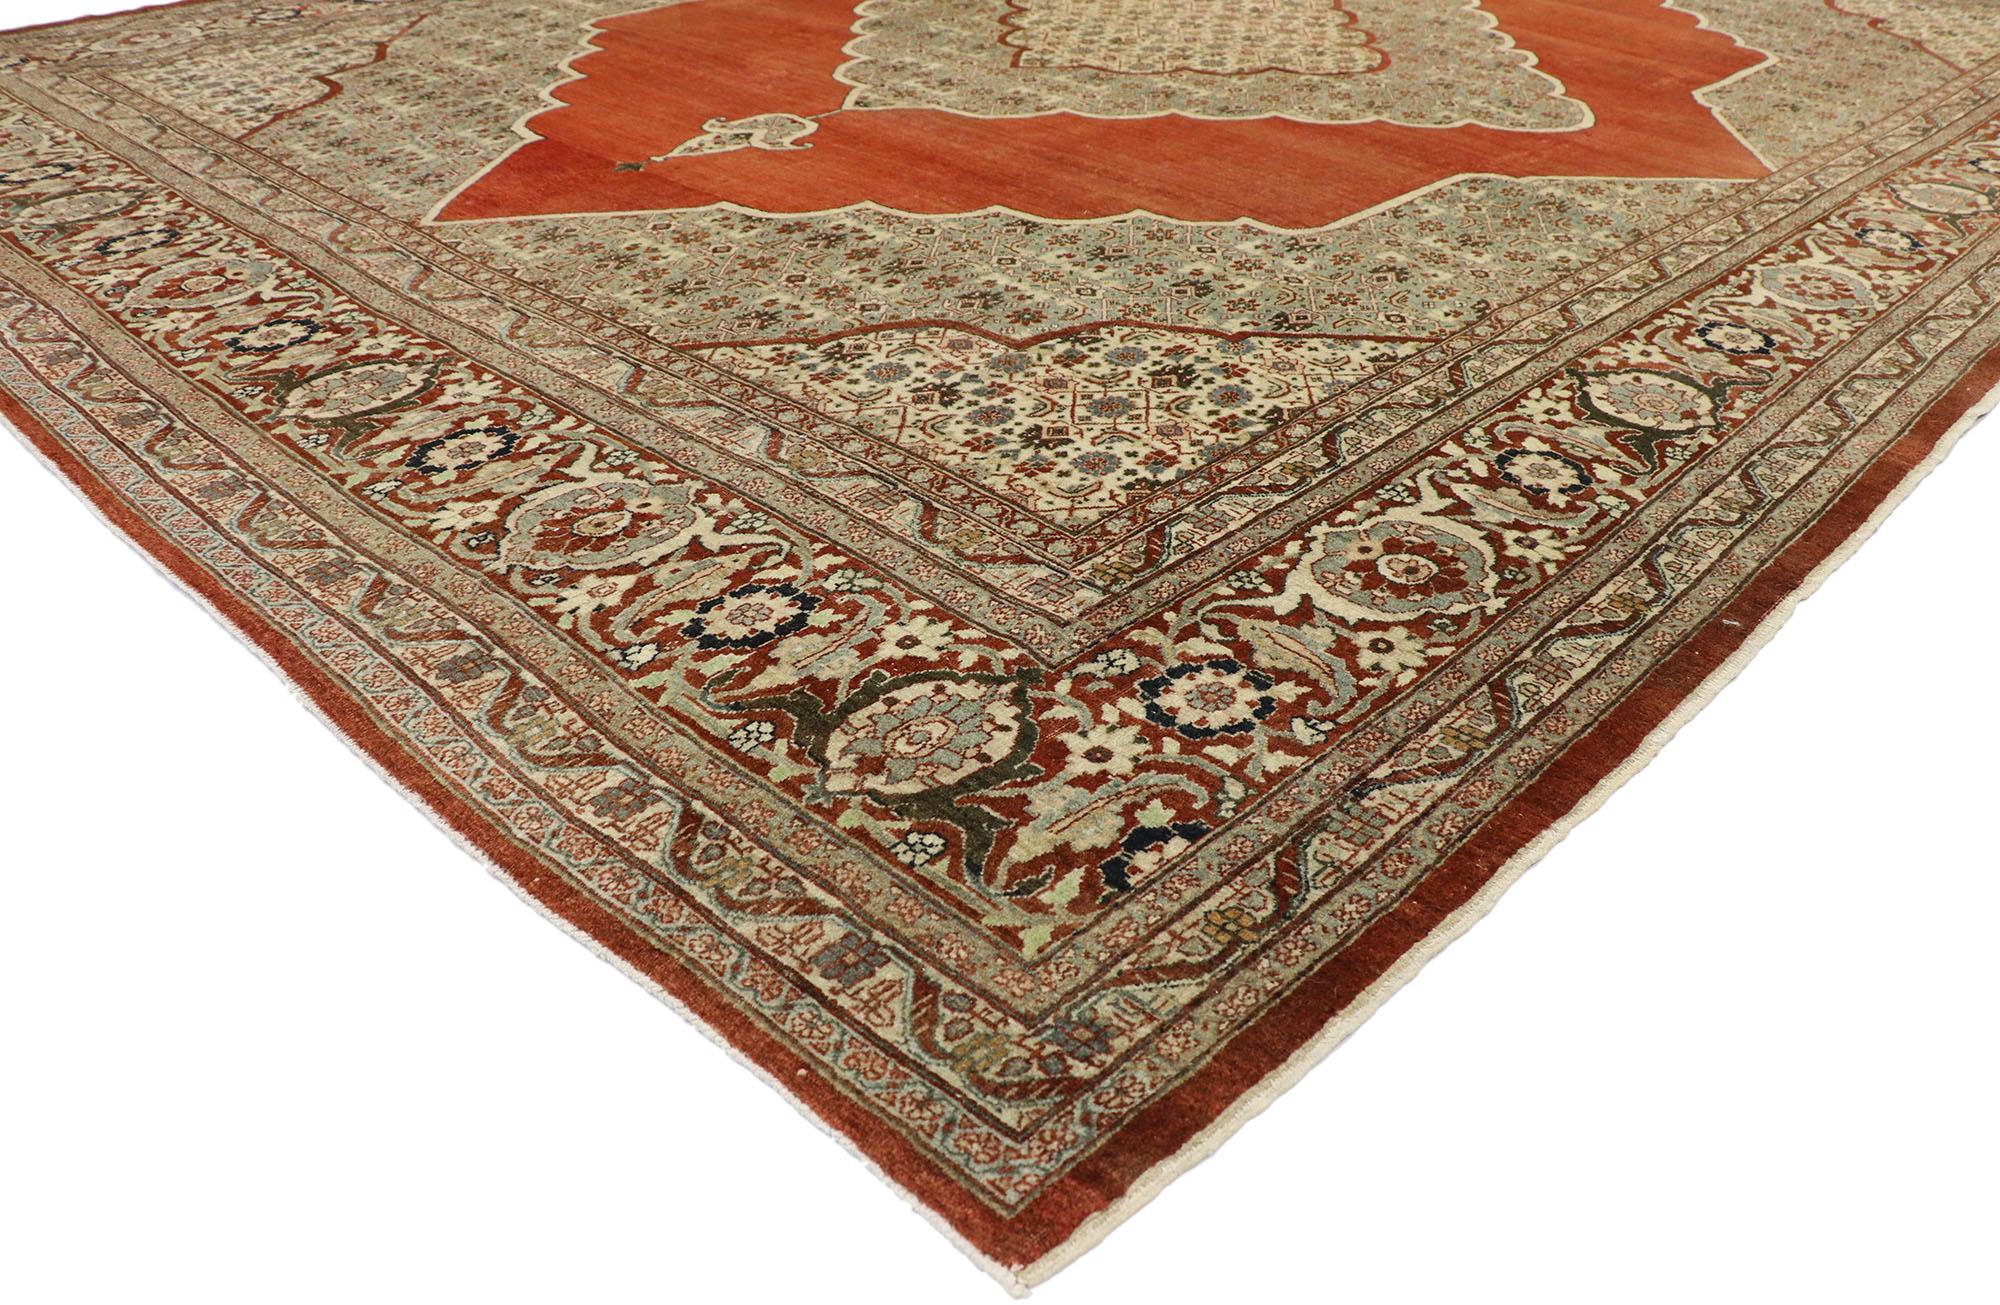 53482, Haji Khalili antique Persian Tabriz rug with English Tudor Manor House style. With its warm earth-tone colors and ornate detailing, this hand knotted wool Haji Khalili antique Persian Tabriz rug is poised to impress. The abrashed brick red